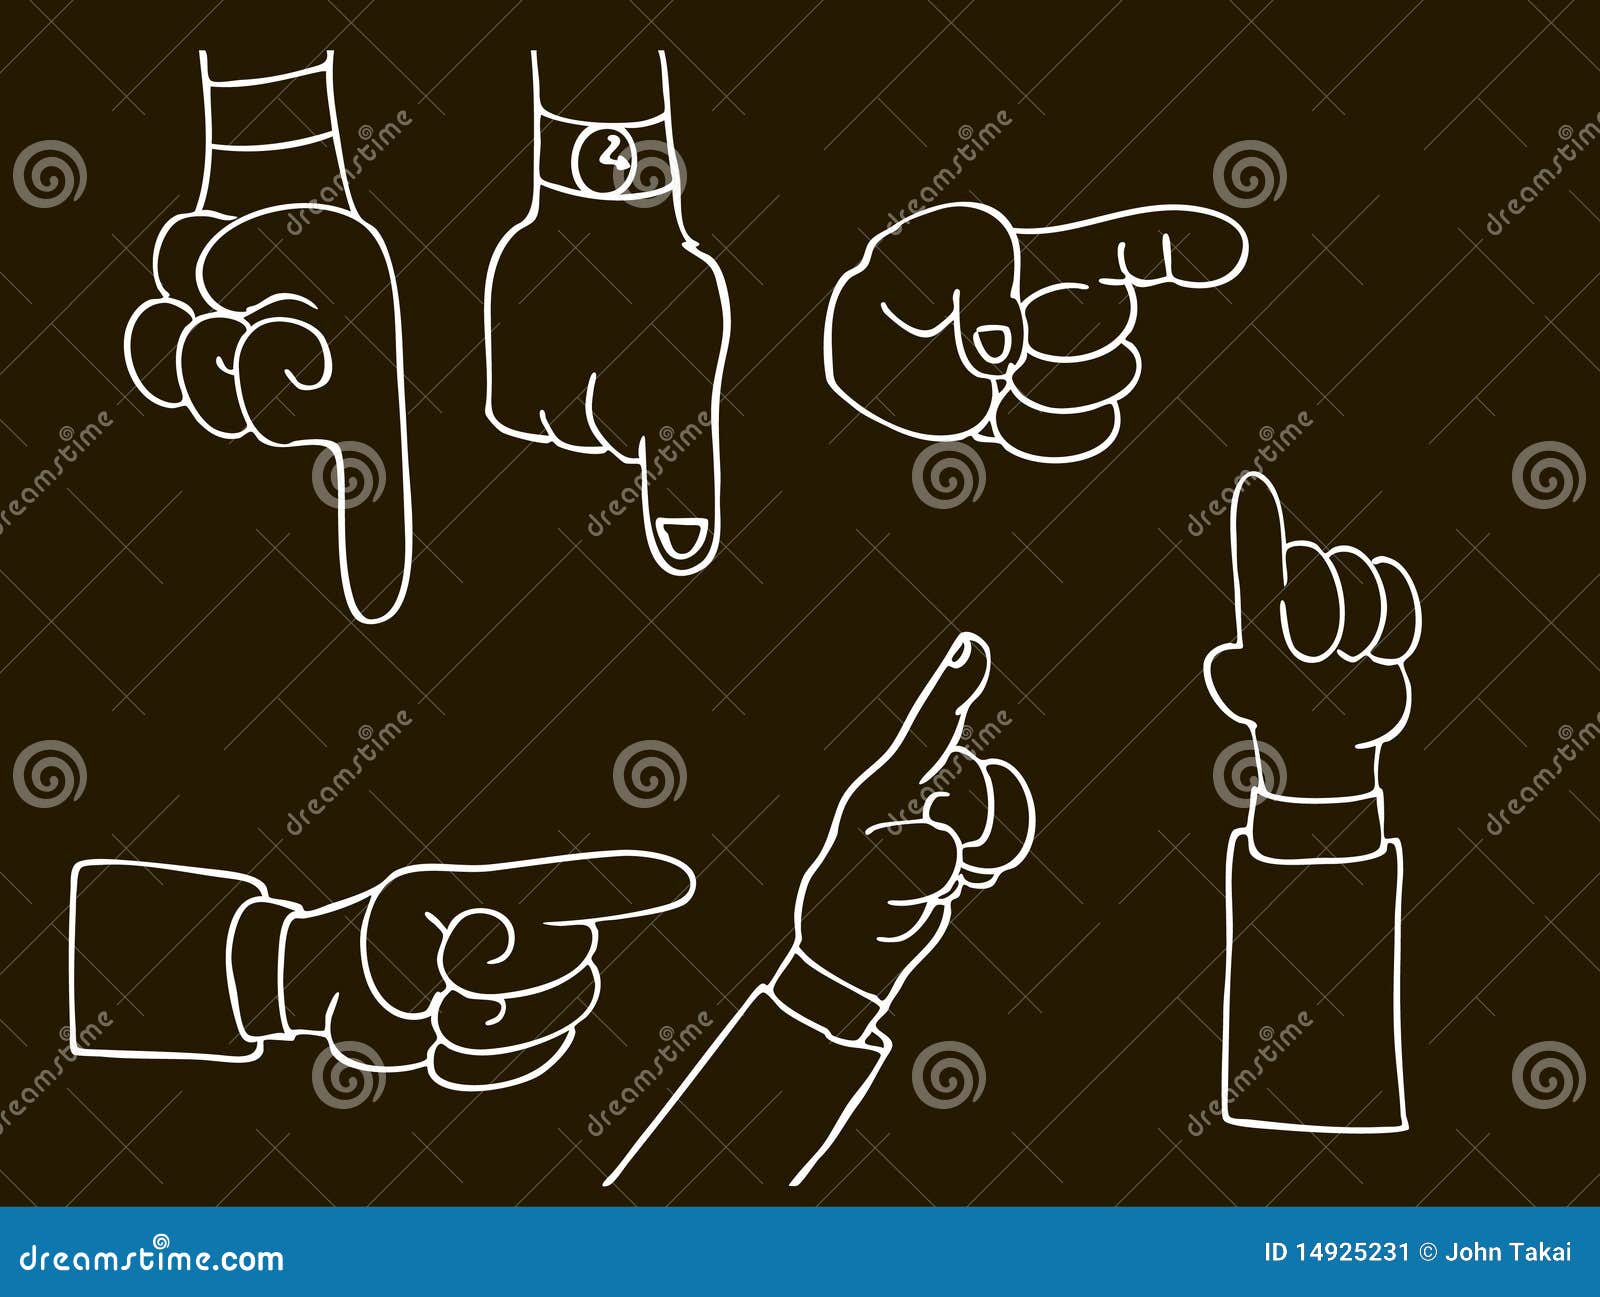 Pointing Hands stock vector. Illustration of freehand - 14925231